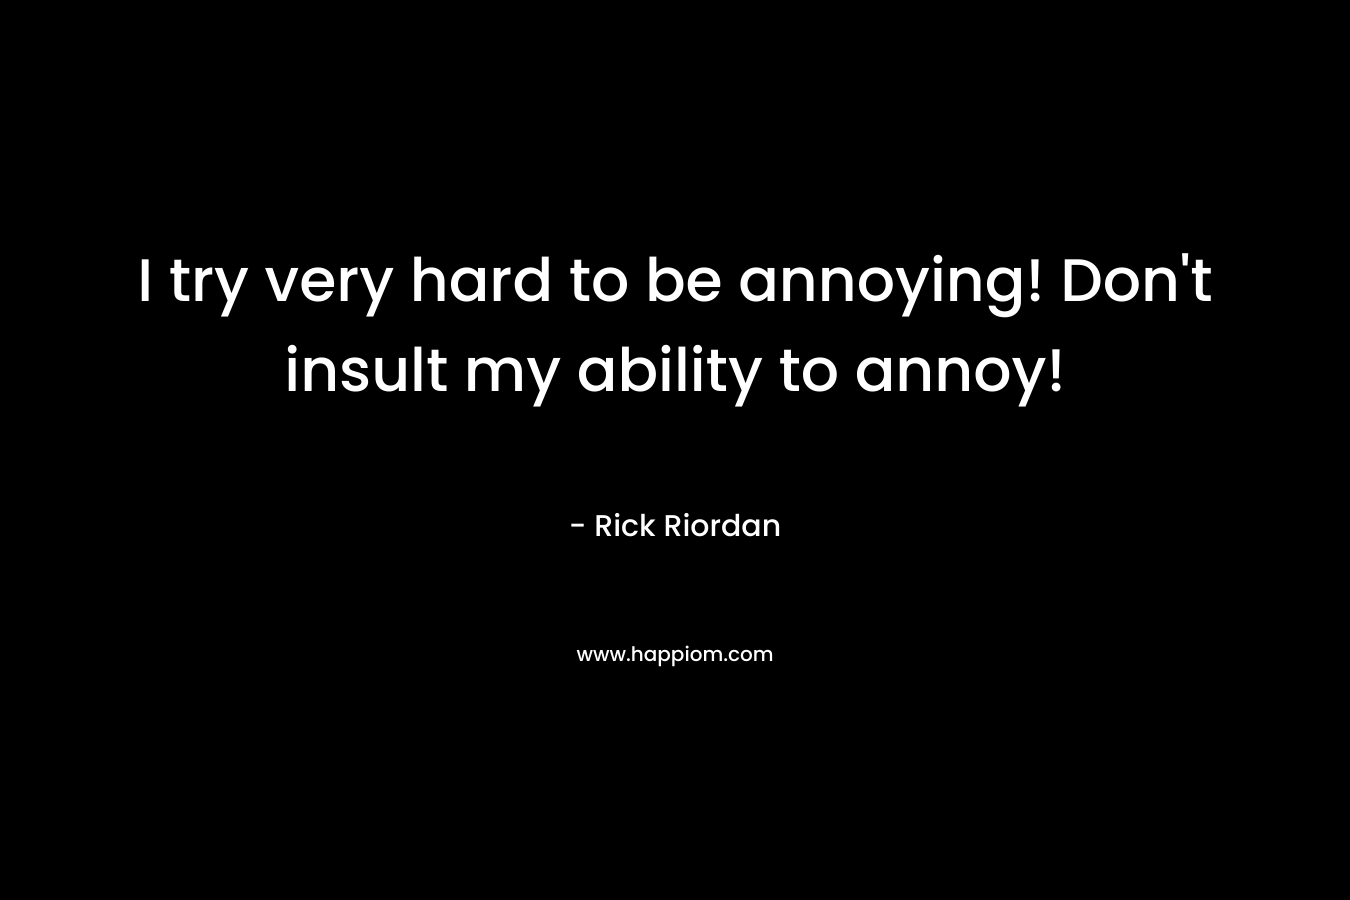 I try very hard to be annoying! Don't insult my ability to annoy!